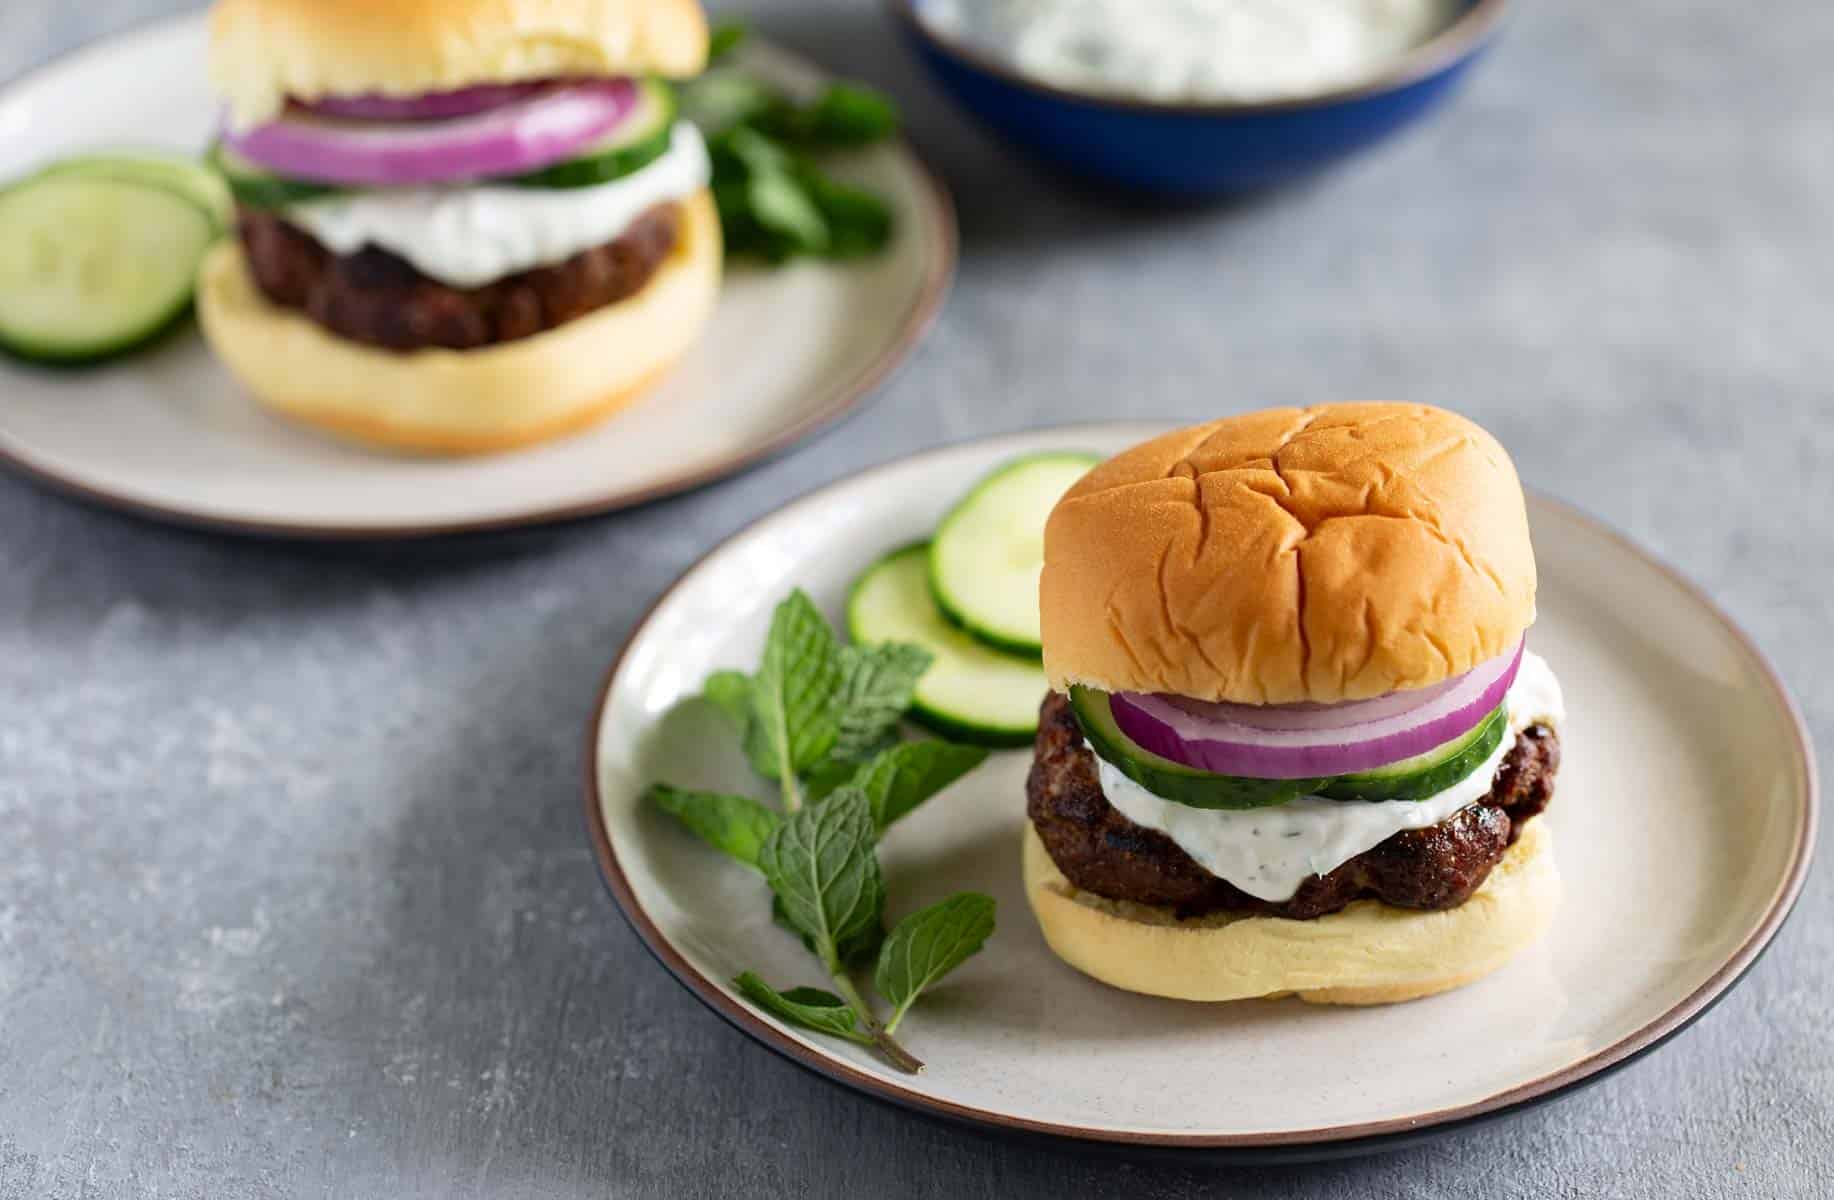 Two plates with lamb burgers topped with creamy tzatziki sauce, red onion slices, and cucumber rounds. A sprig of fresh mint and more cucumber slices accompany the burgers, with a dipping sauce in the background.